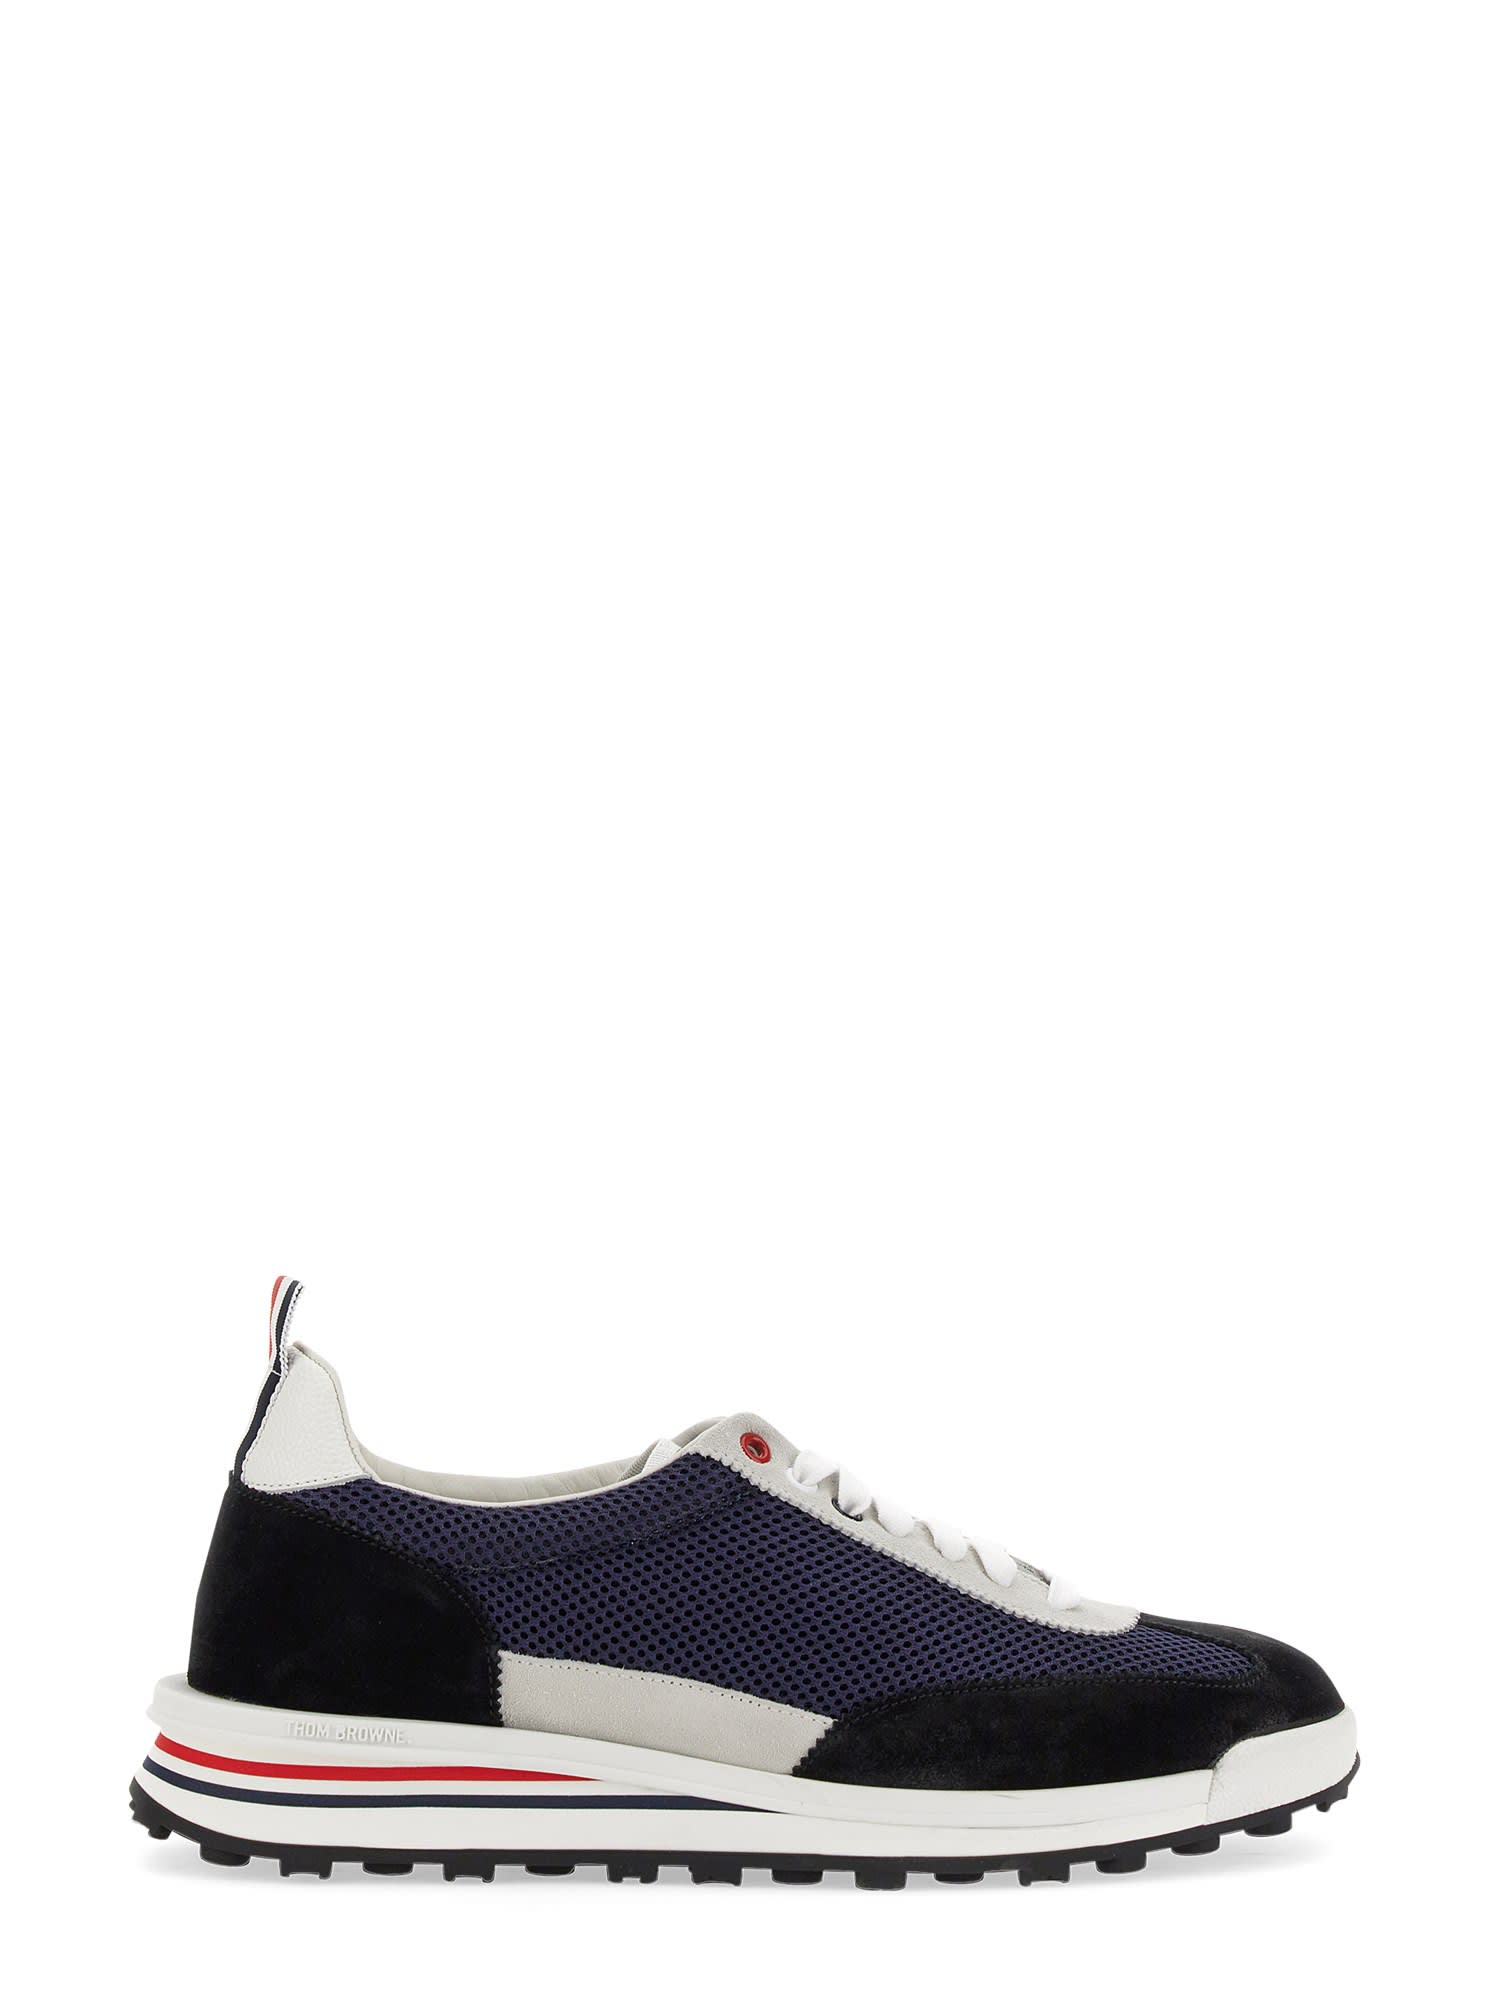 THOM BROWNE SNEAKER WITH SUEDE INSERTS